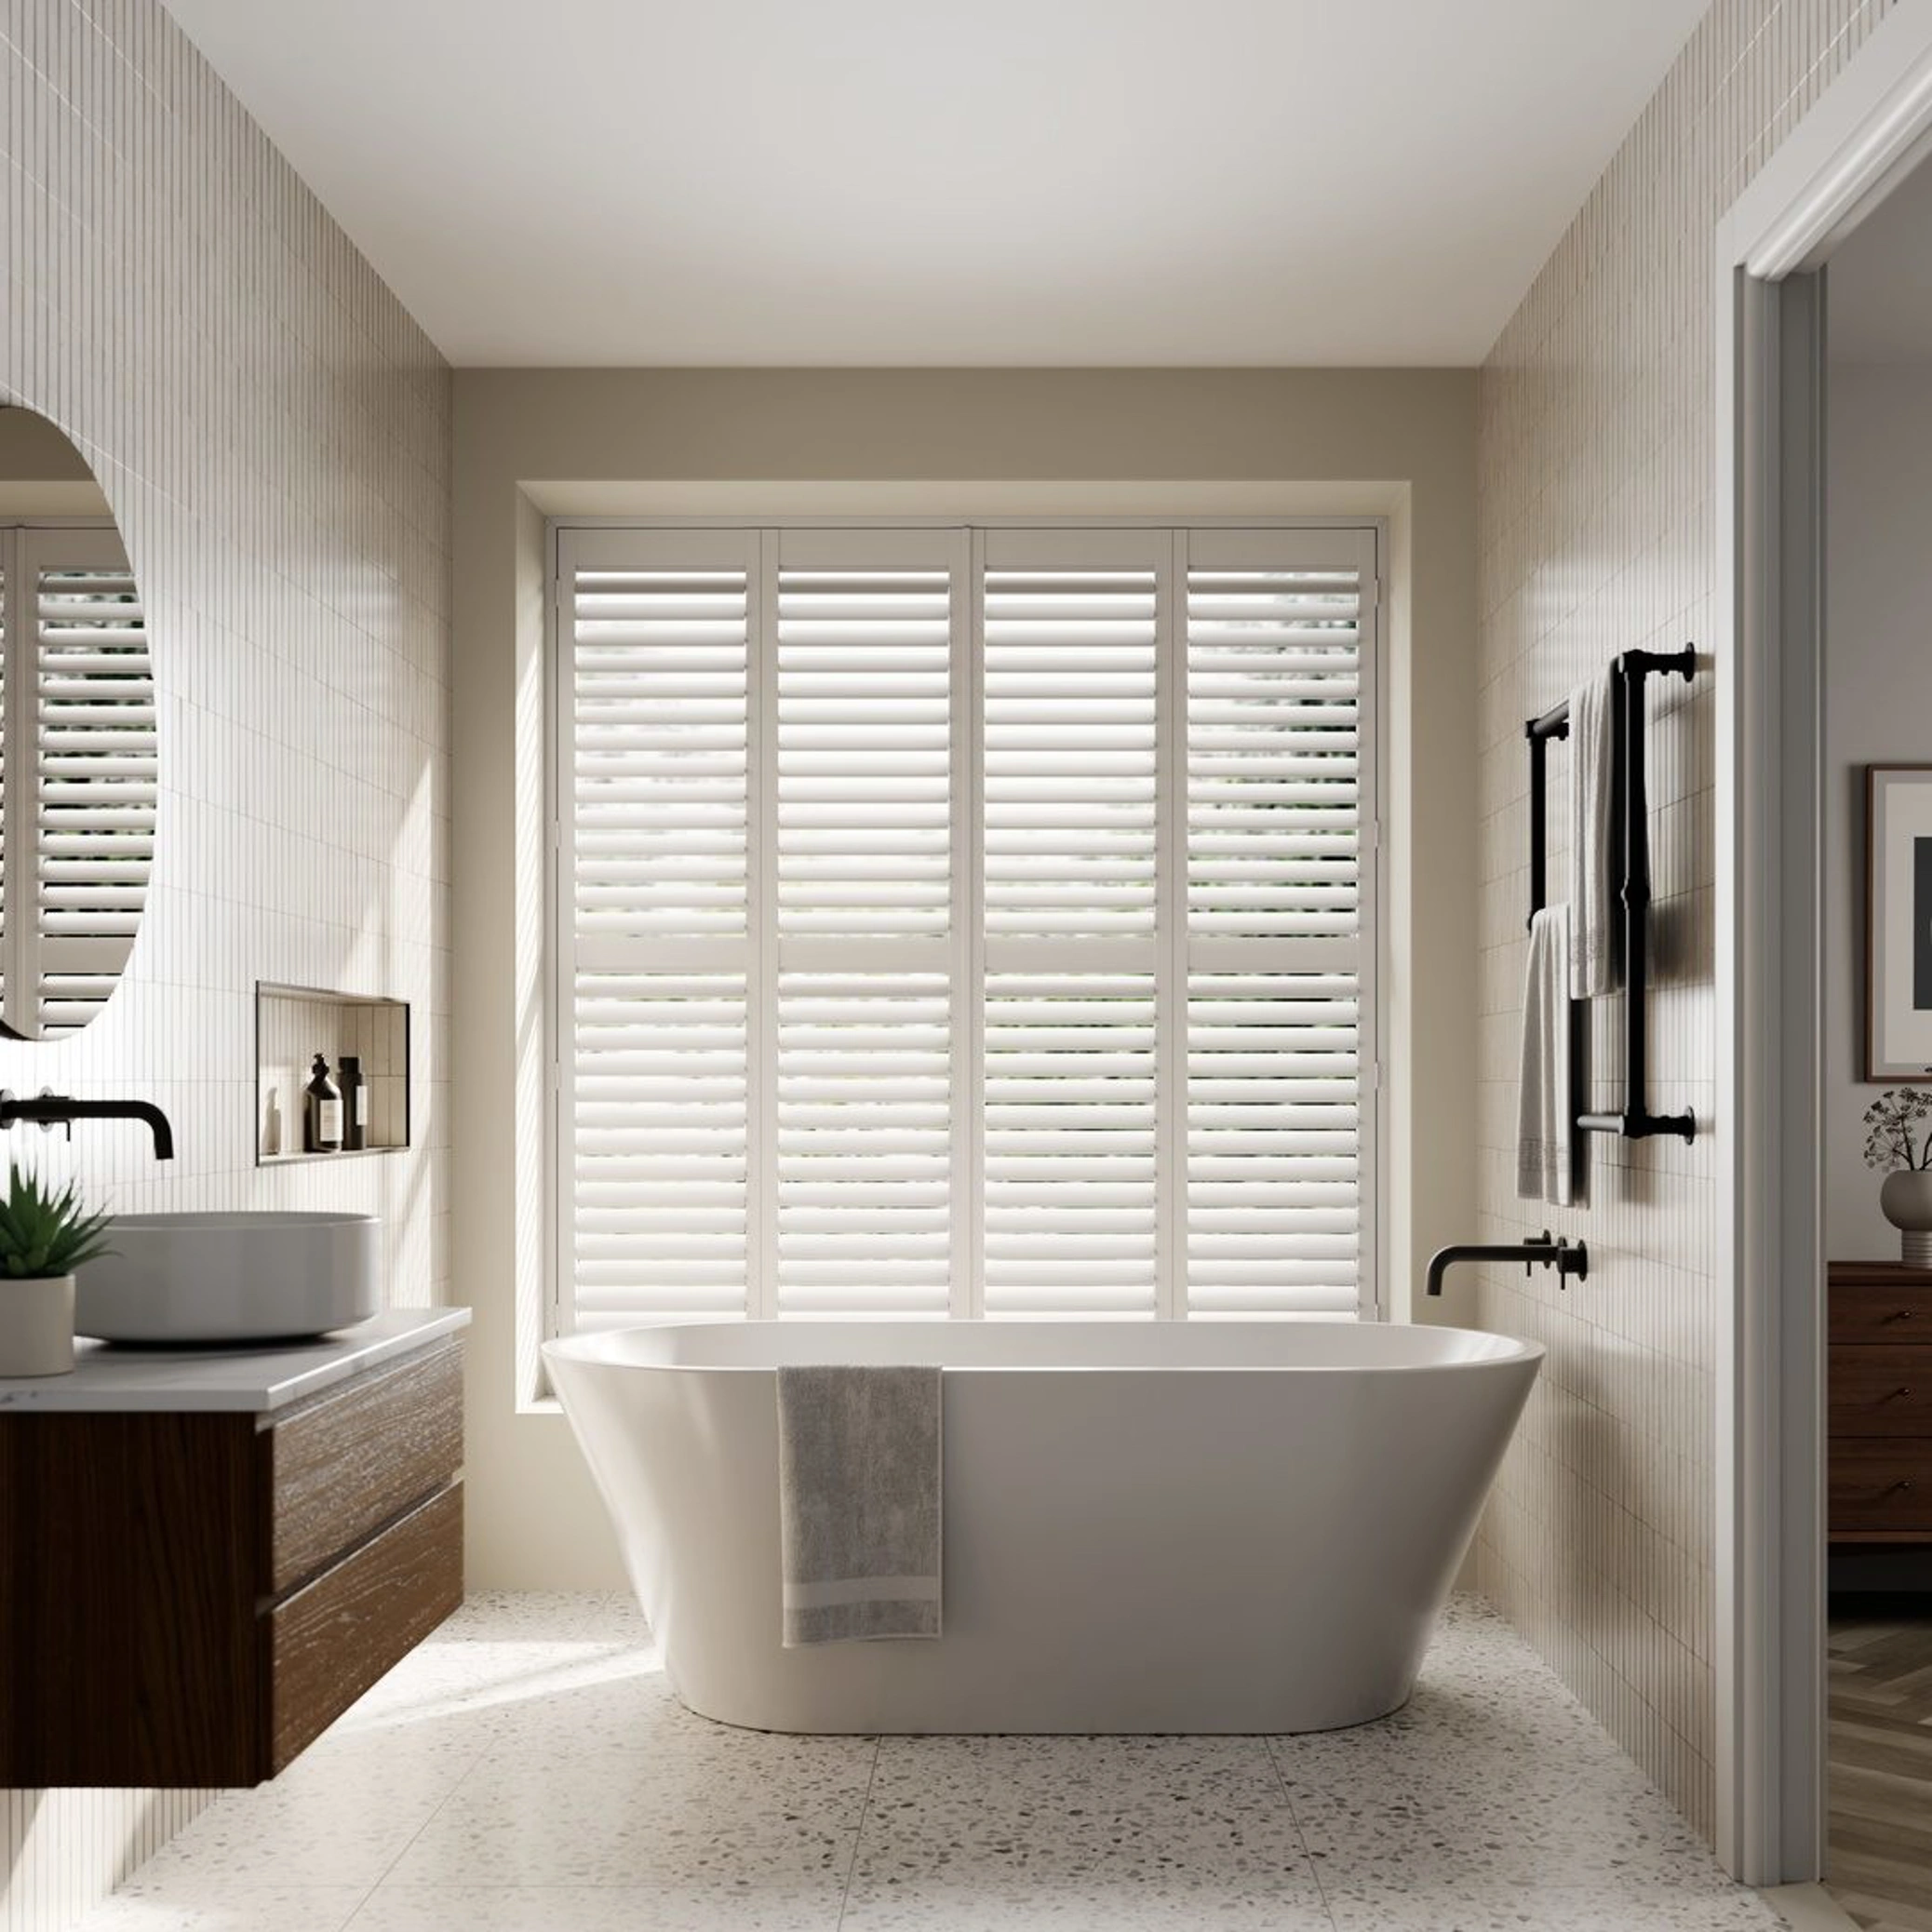 Placeholder image for use on California Shutters